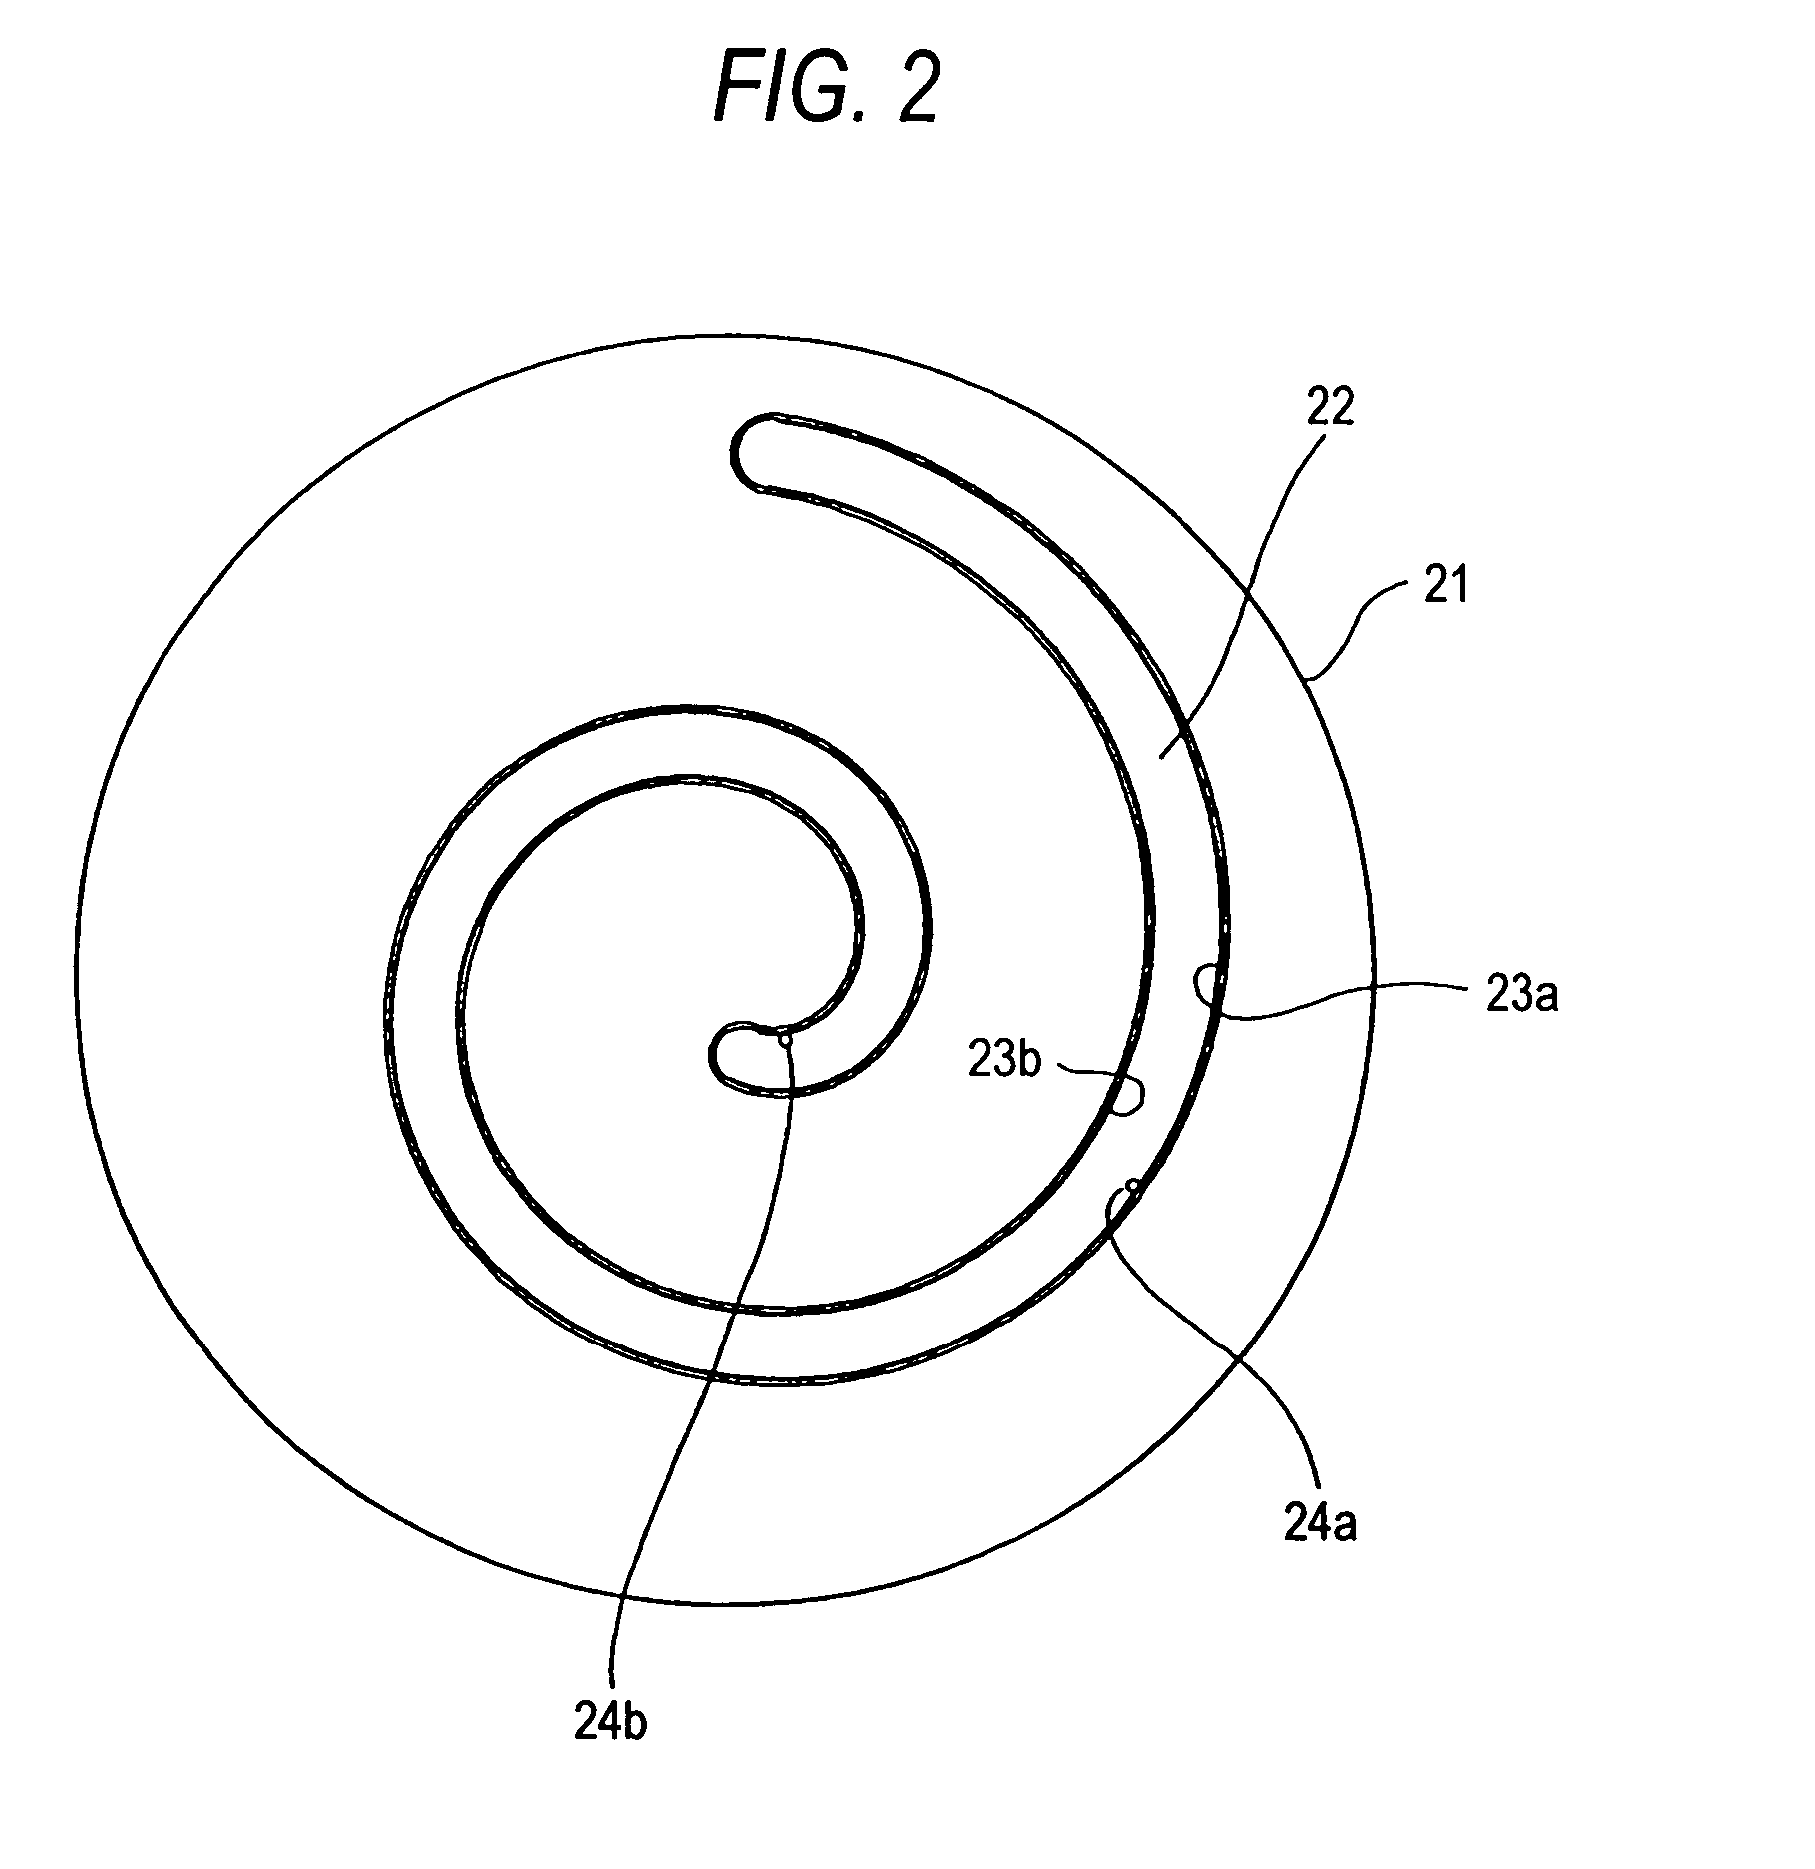 Heat storage apparatus with spiral electrically heated phase change material